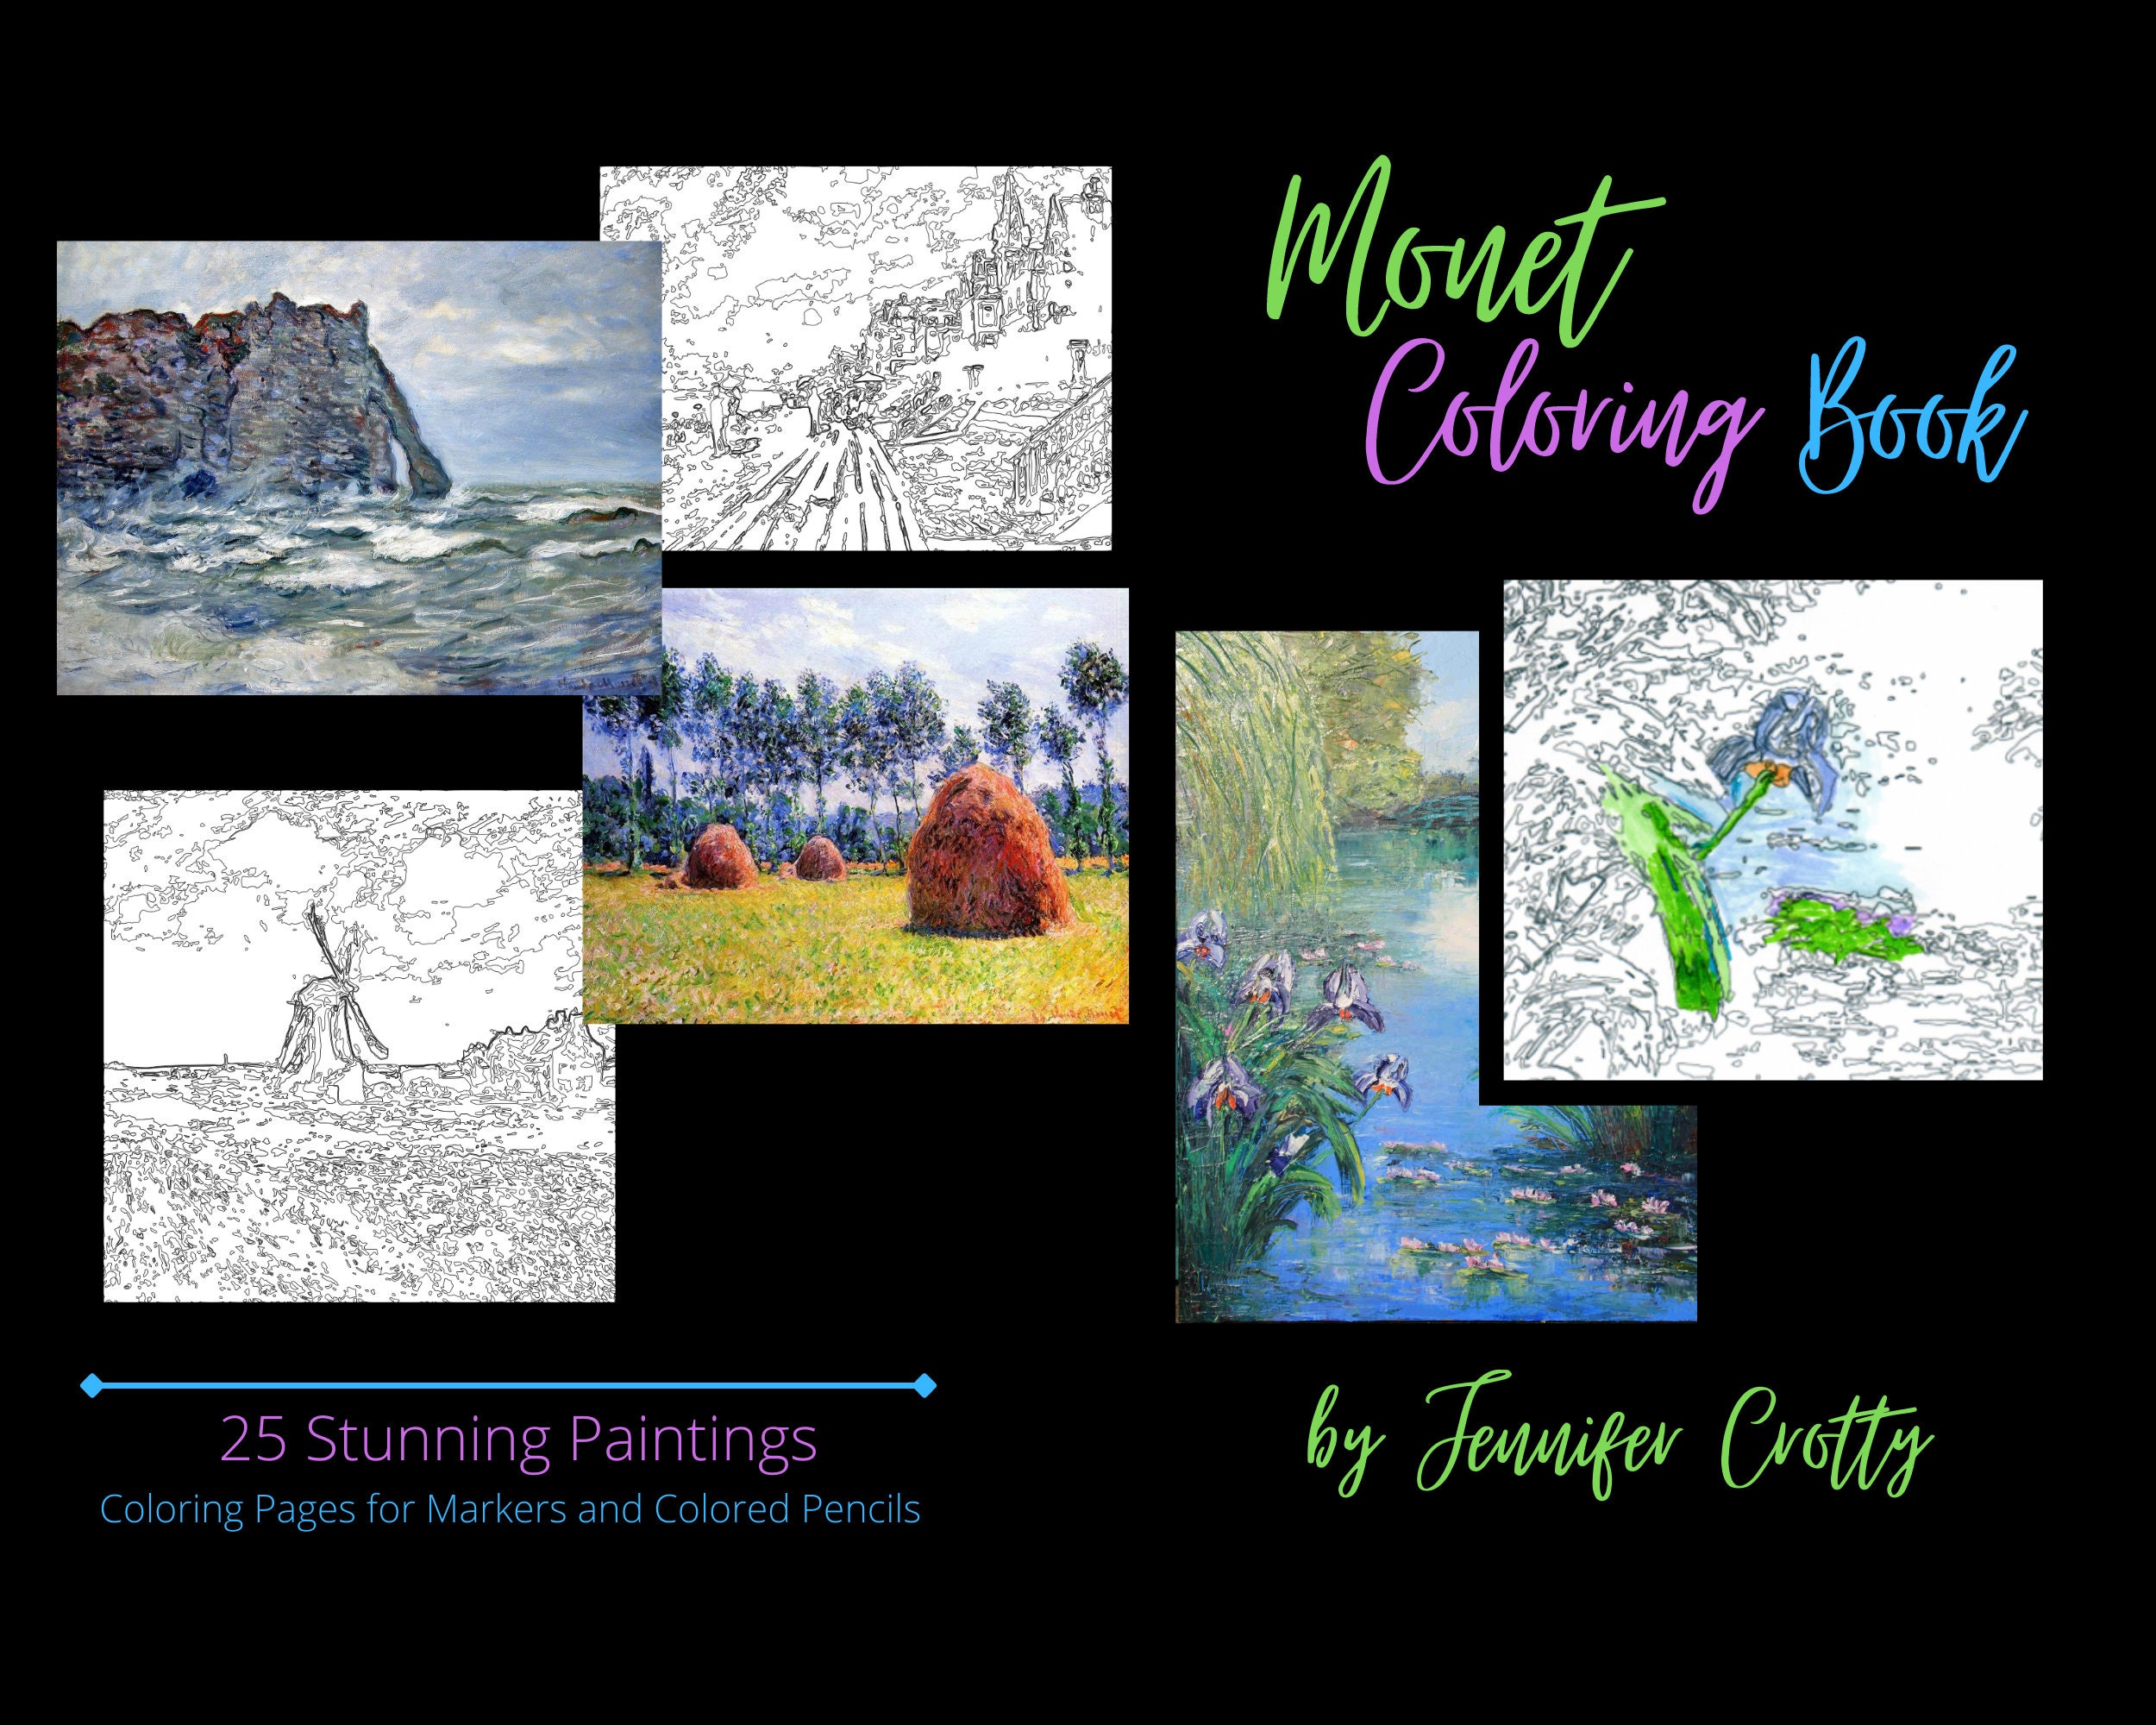 Monet Coloring Book: Coloring Pages For Markers and Colored Pencils